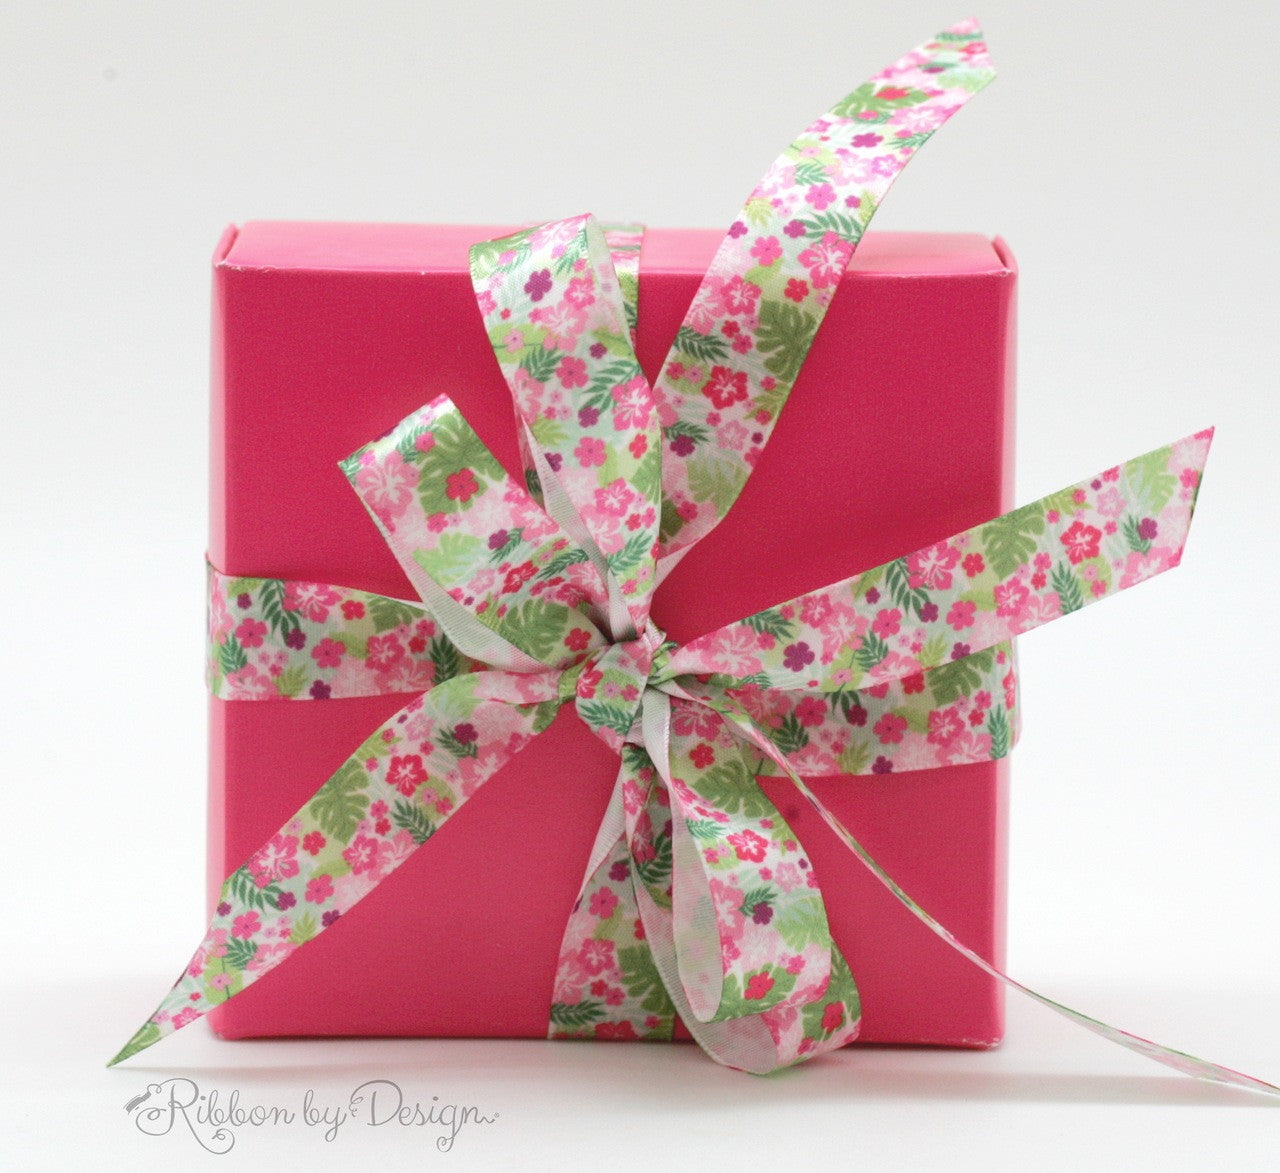 A hot pink box tied with our pretty tropical floral ribbon makes a wonderful Summer surprise for the lucky recipient!